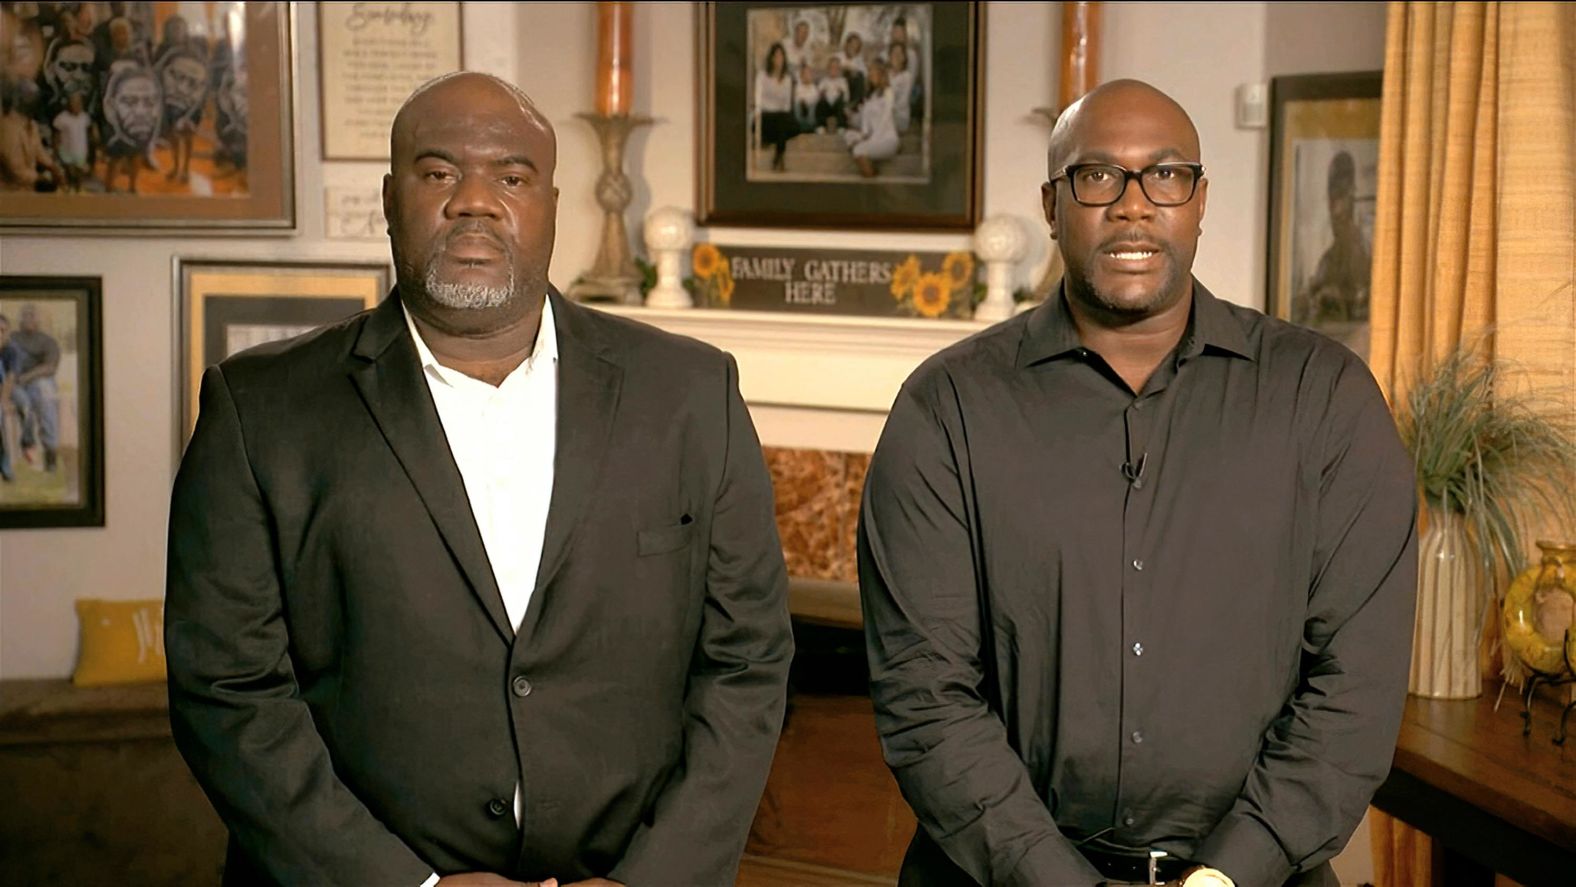 George Floyd's brothers Rodney, left, and Philonise <a href="index.php?page=&url=https%3A%2F%2Fwww.cnn.com%2Fpolitics%2Flive-news%2Fdnc-2020-day-1%2Fh_168d51d043ca6c27c8841ec025599273" target="_blank">appear together on Monday.</a> Philonise said the movement that has started in the wake of George's death is a "fitting legacy," but he said: "George should be alive today. Breonna Taylor should be alive today. Ahmaud Arbery should be alive today. Eric Garner should be alive today. Stephon Clark, Atatiana Jefferson, Sandra Bland — they should all be alive today."